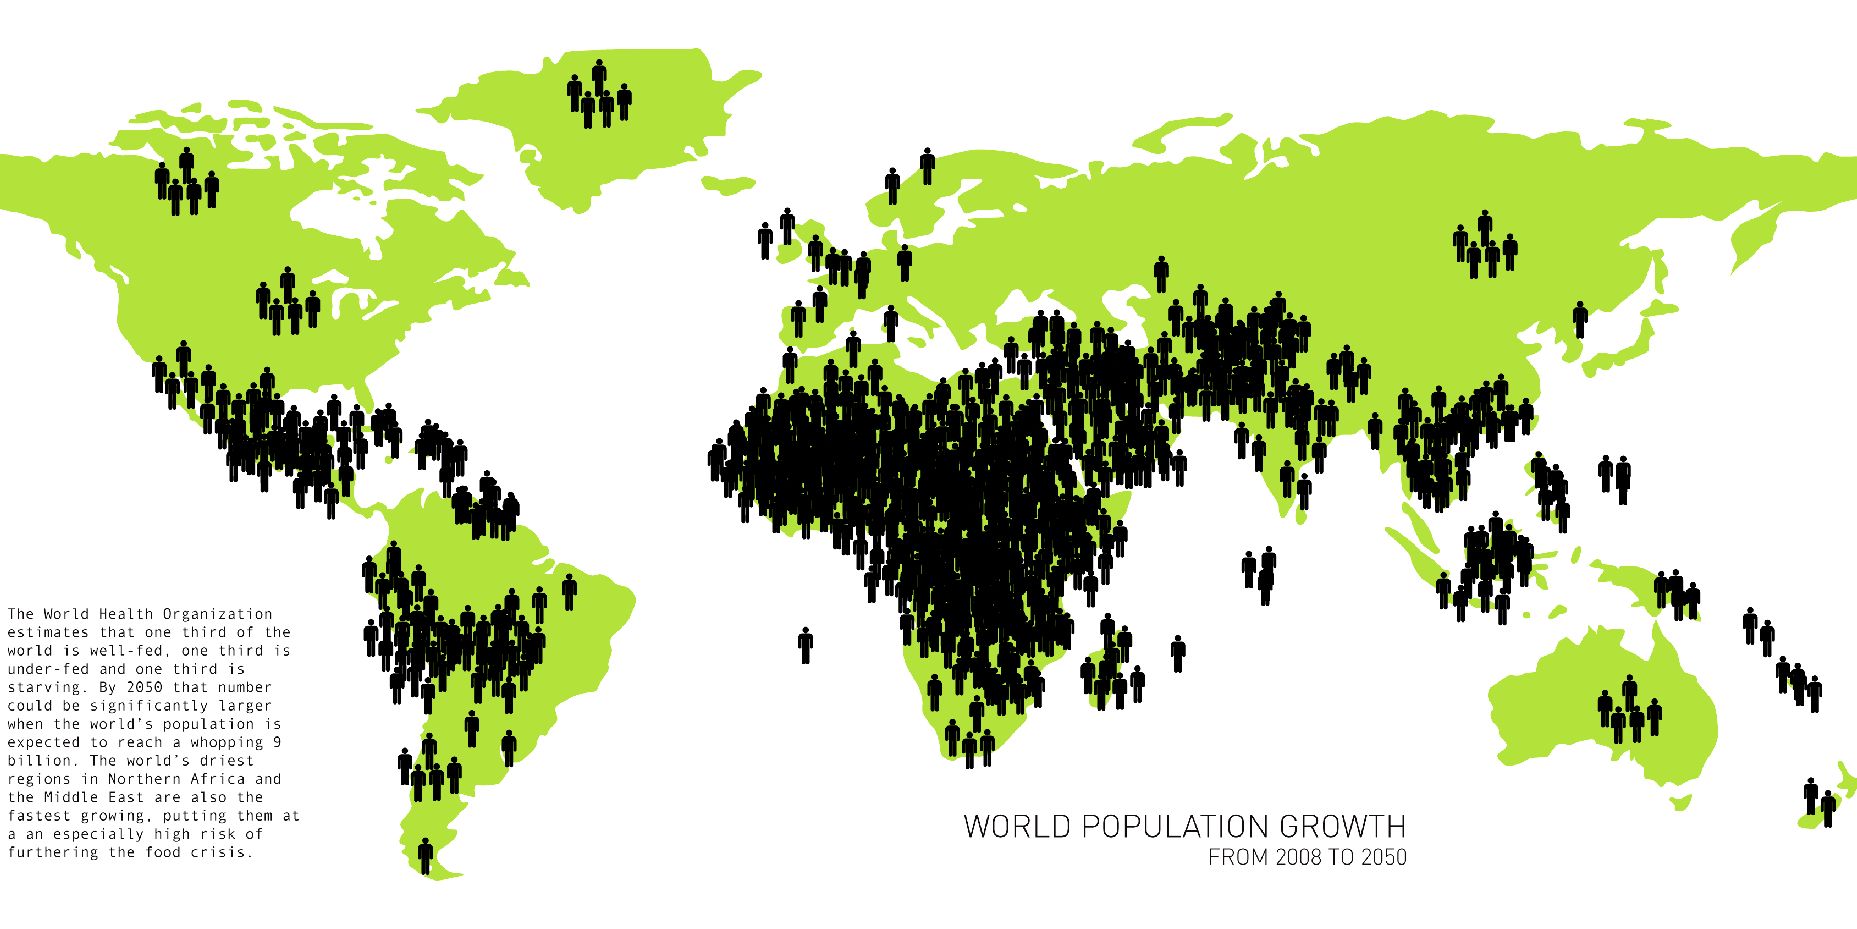 Map of the world showing population growth